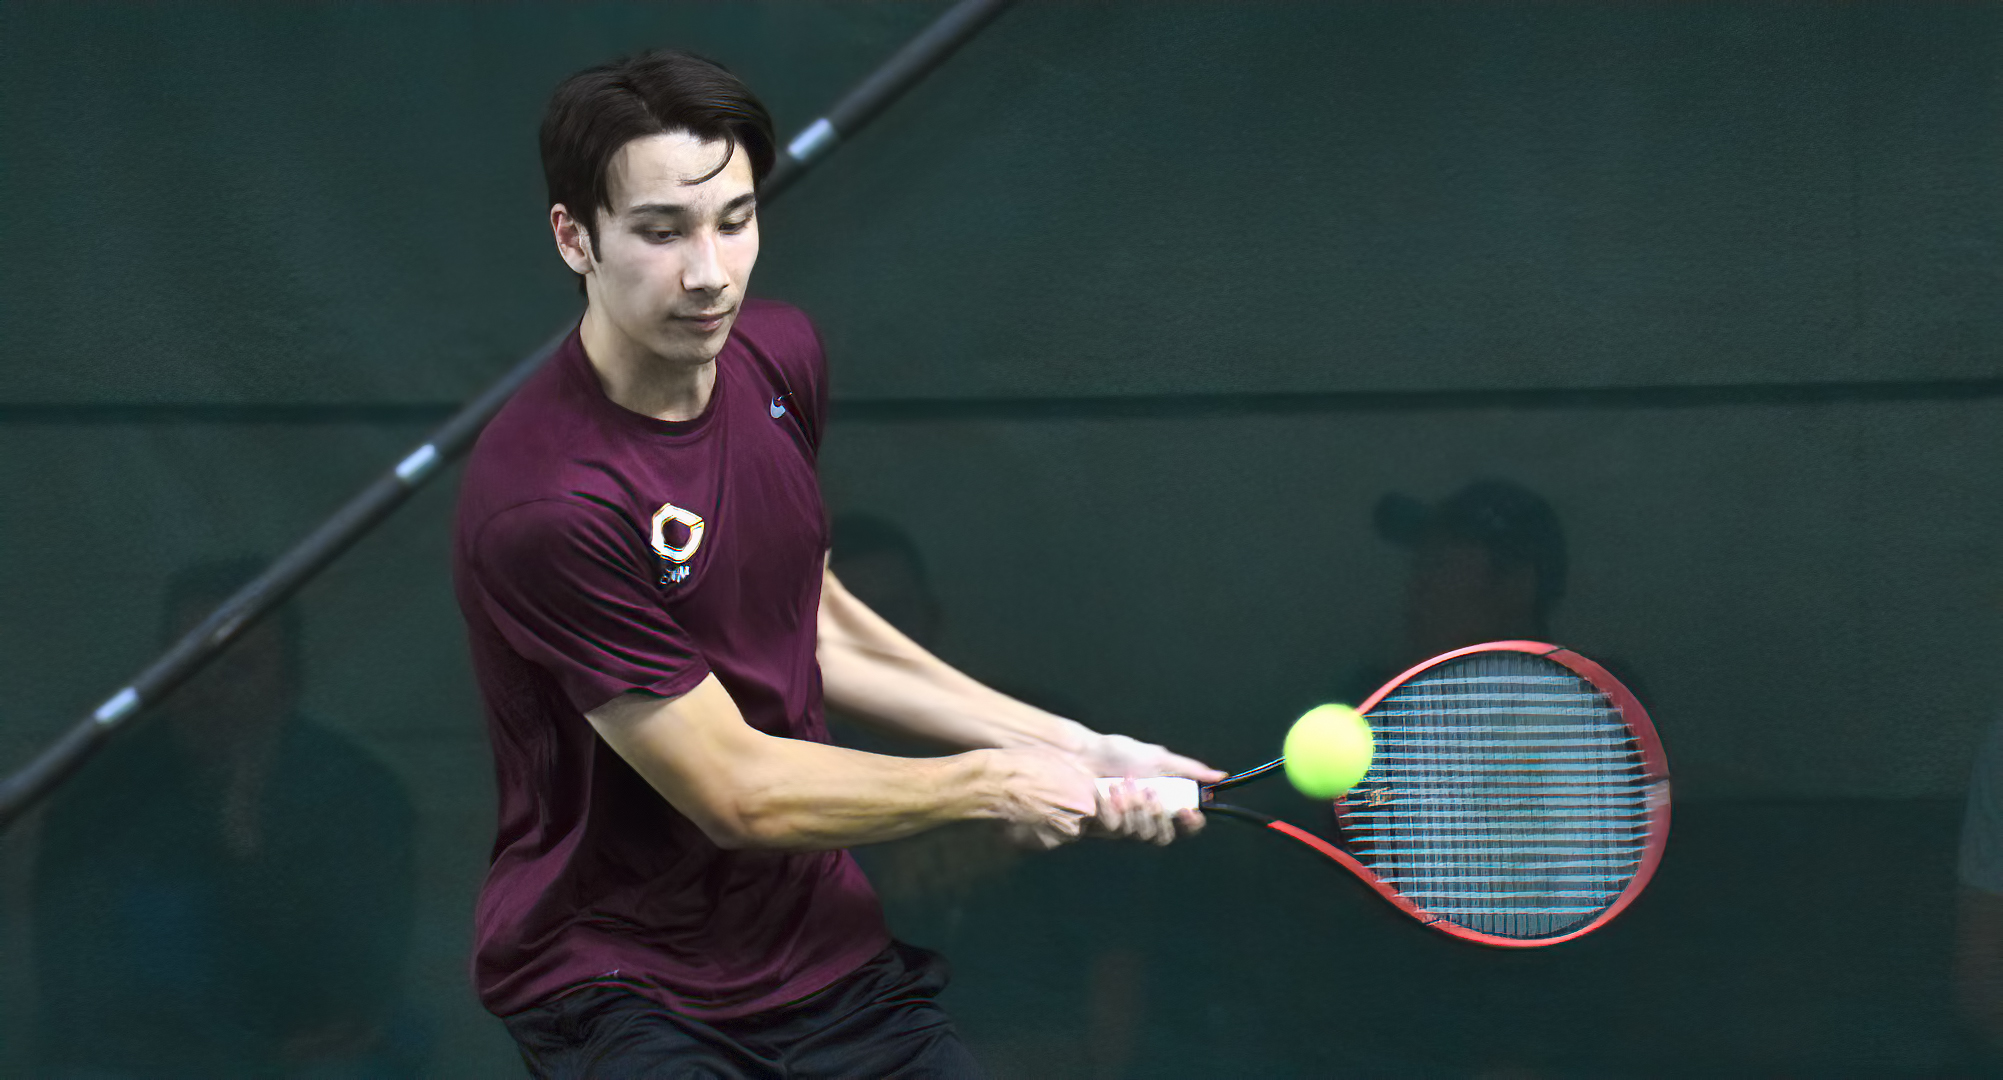 Freshman Kai Pierce goes for the backhand return during the Cobbers' two matches against UMAC opponents. Pierce is 5-1 in singles this season.